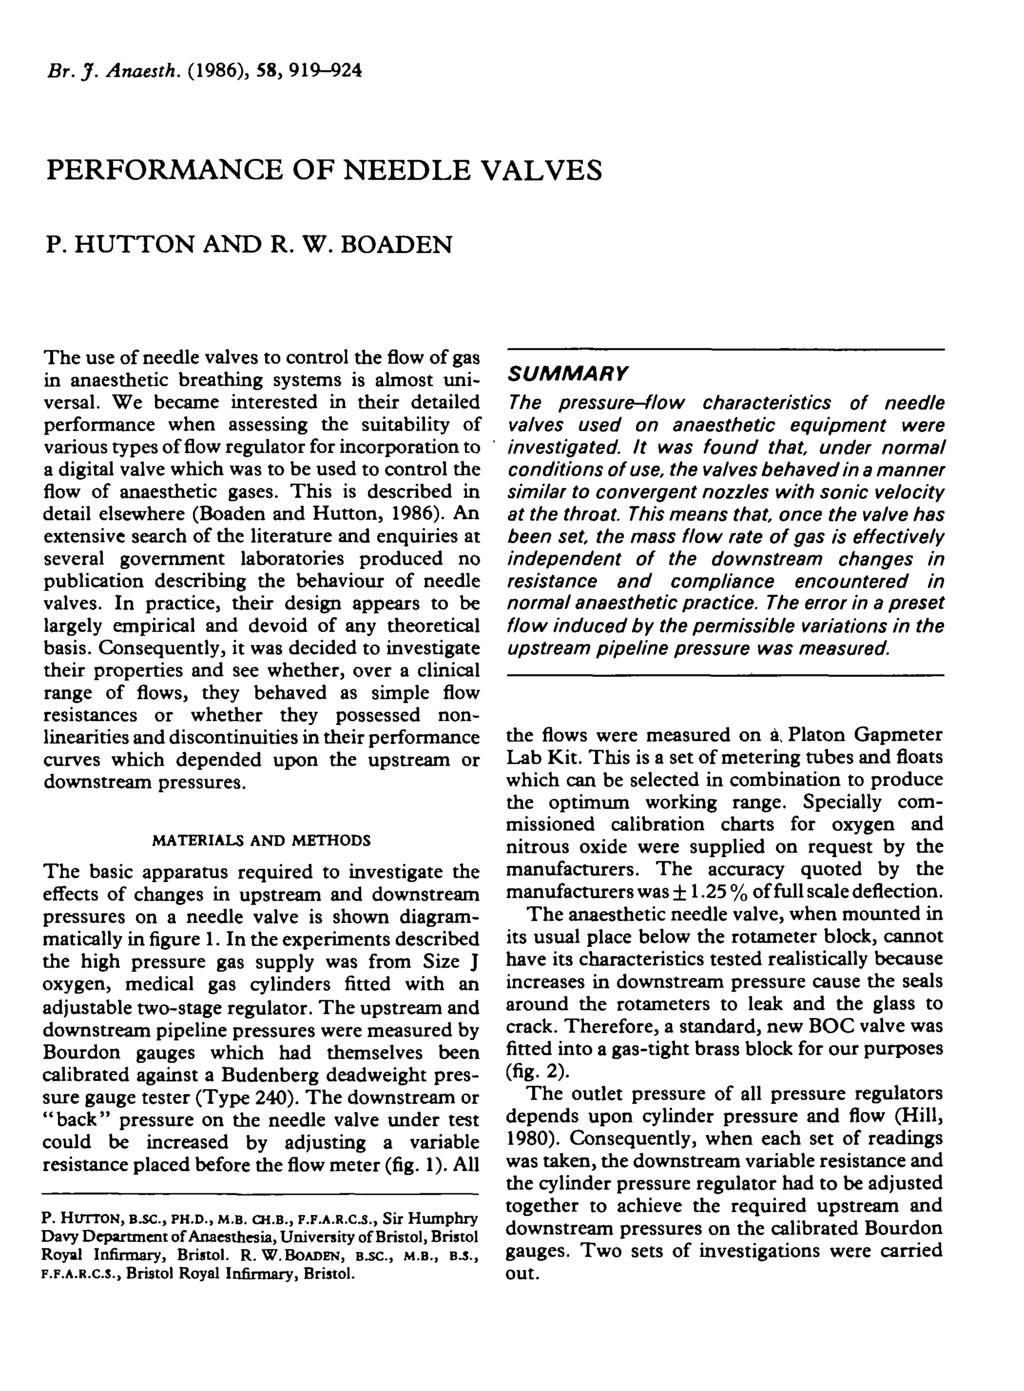 Br. J. Anaesth. (1986), 58, 919-924 PERFORMANCE OF NEEDLE VALVES P. HUTTON AND R. W. BOADEN The use of needle valves to control theflowof gas in anaesthetic breathing systems is almost universal.